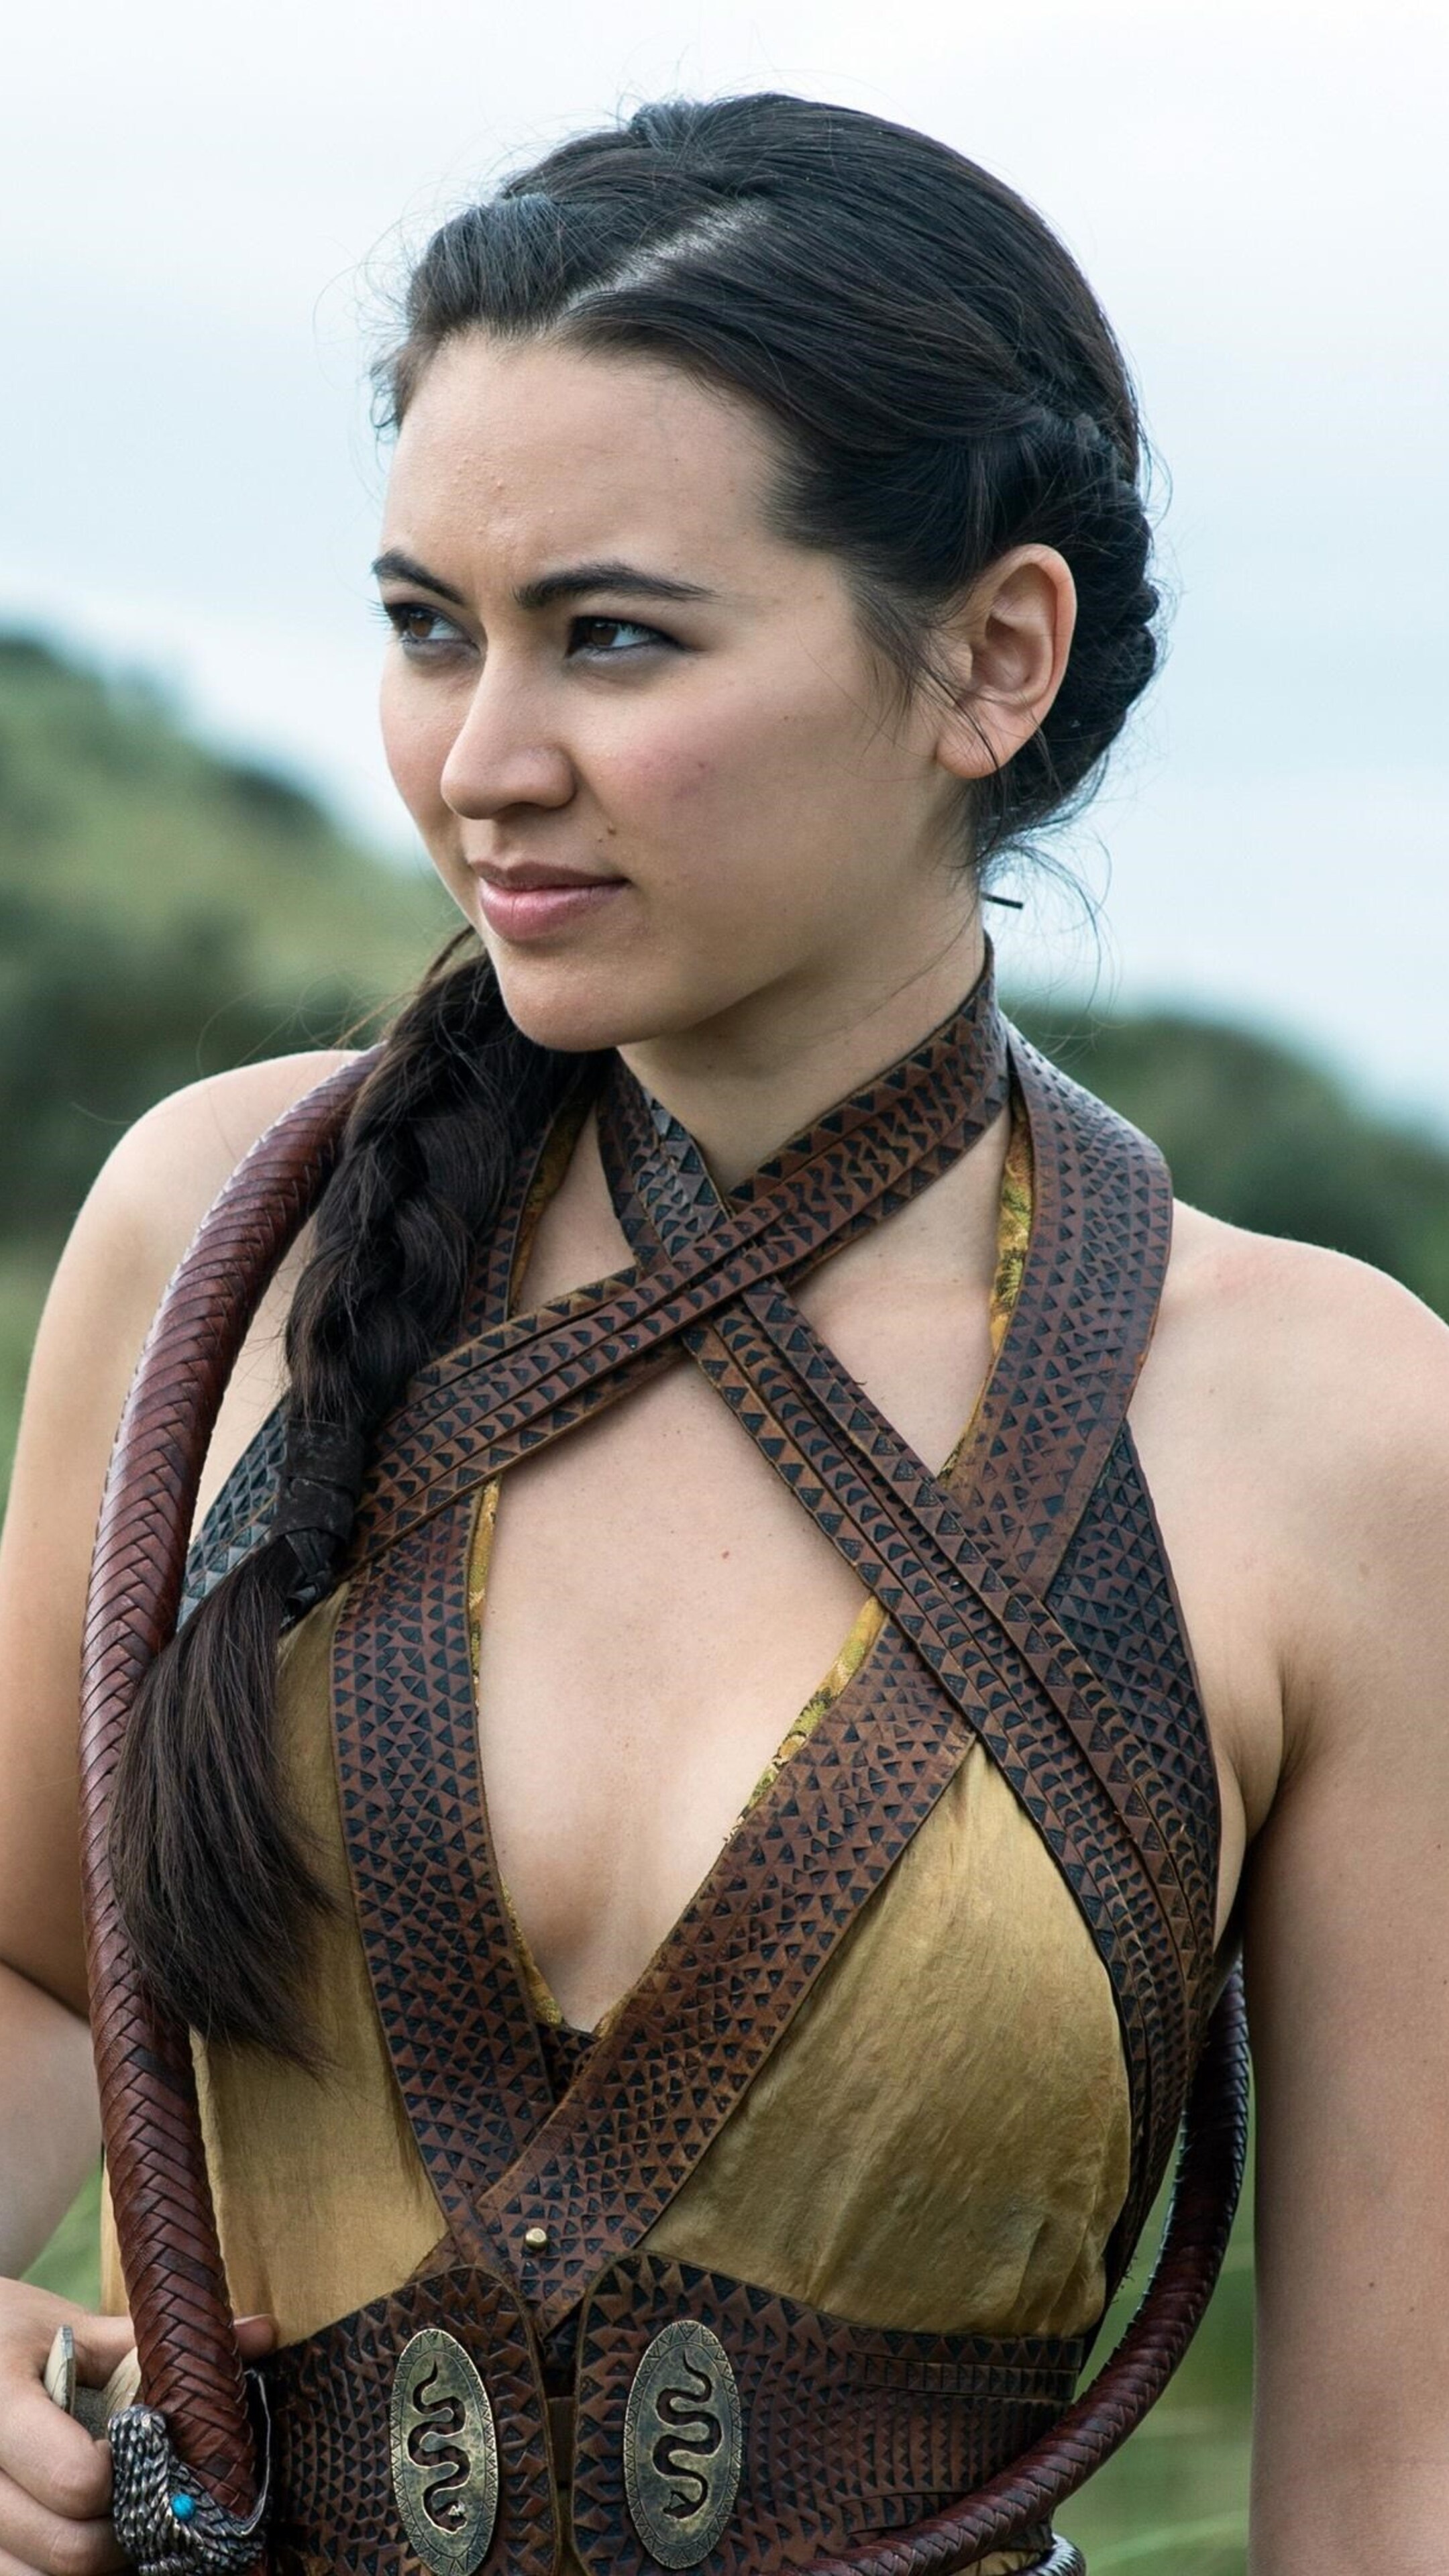 Jessica Henwick: Nymeria Sand, Game of Thrones, An American fantasy television series created by David Benioff and D. B. Weiss. 2160x3840 4K Wallpaper.